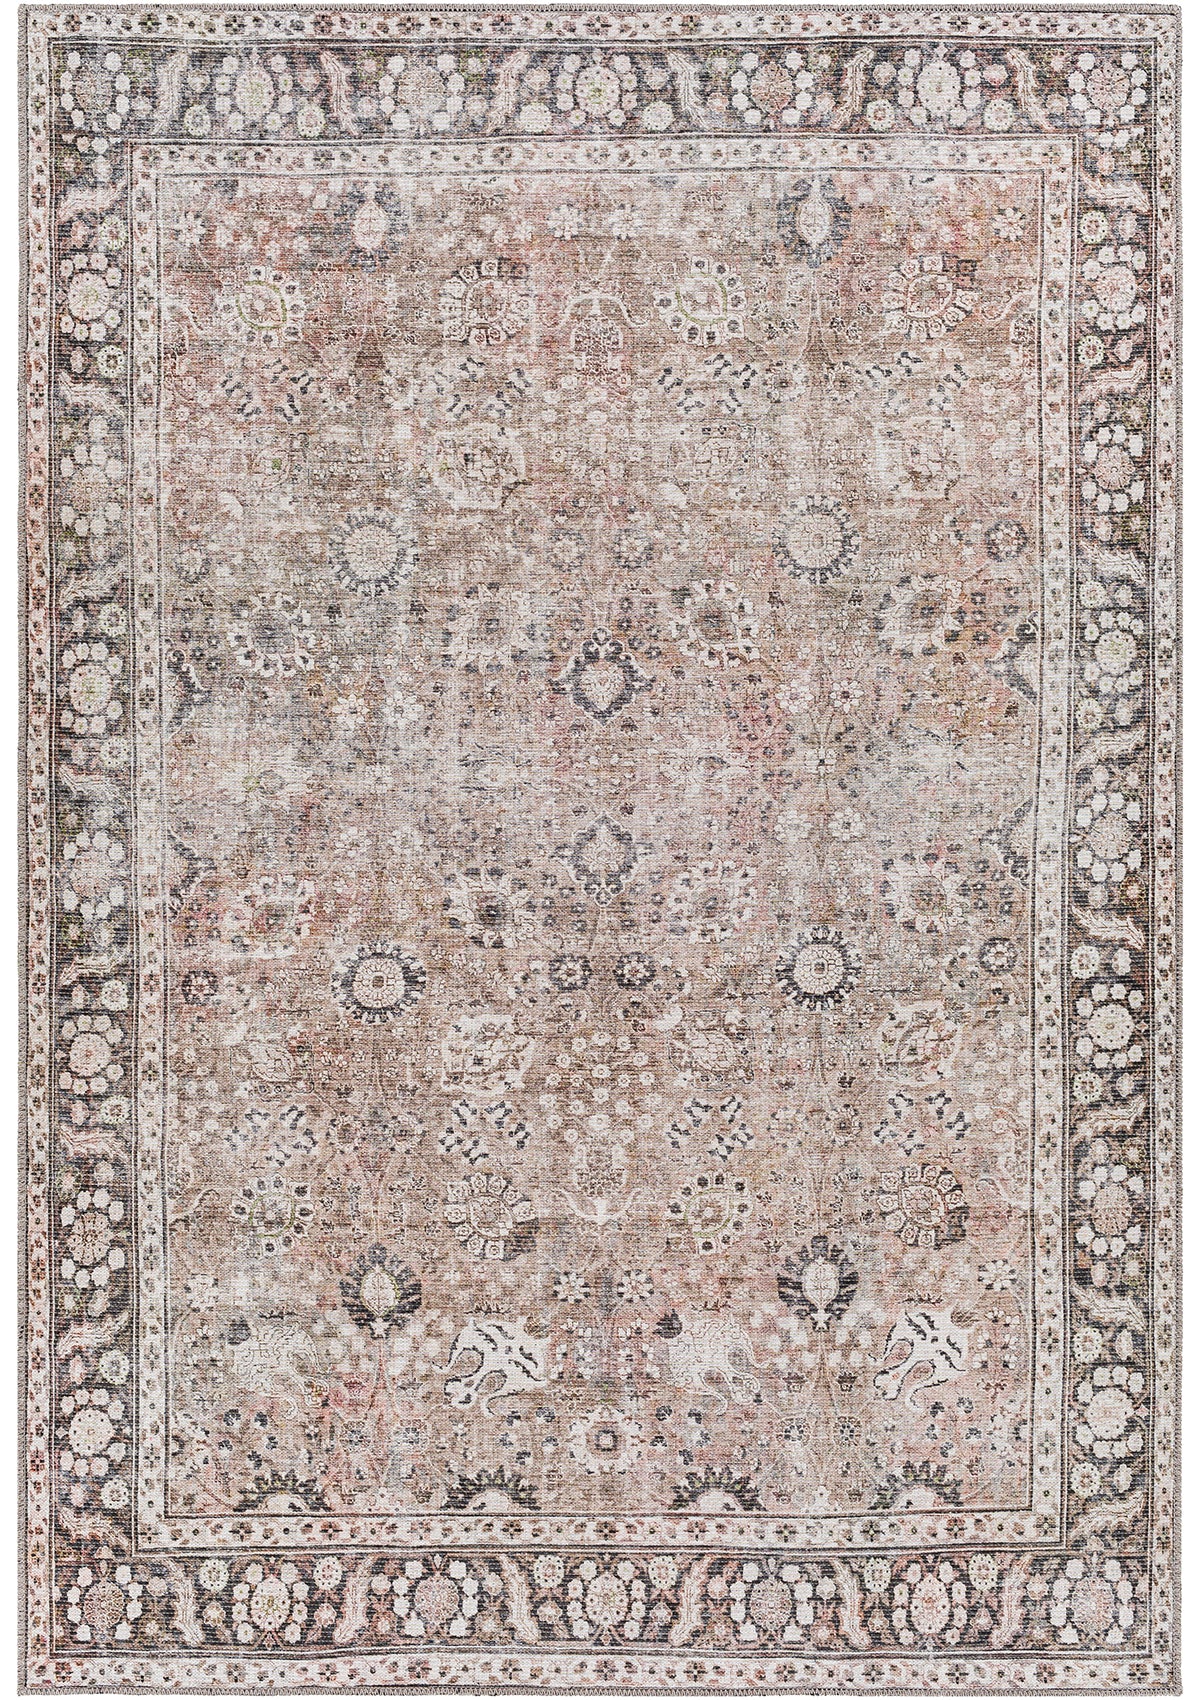 The Monet rug is made up of charcoal, black, tan, medium brown, and cream tones. 